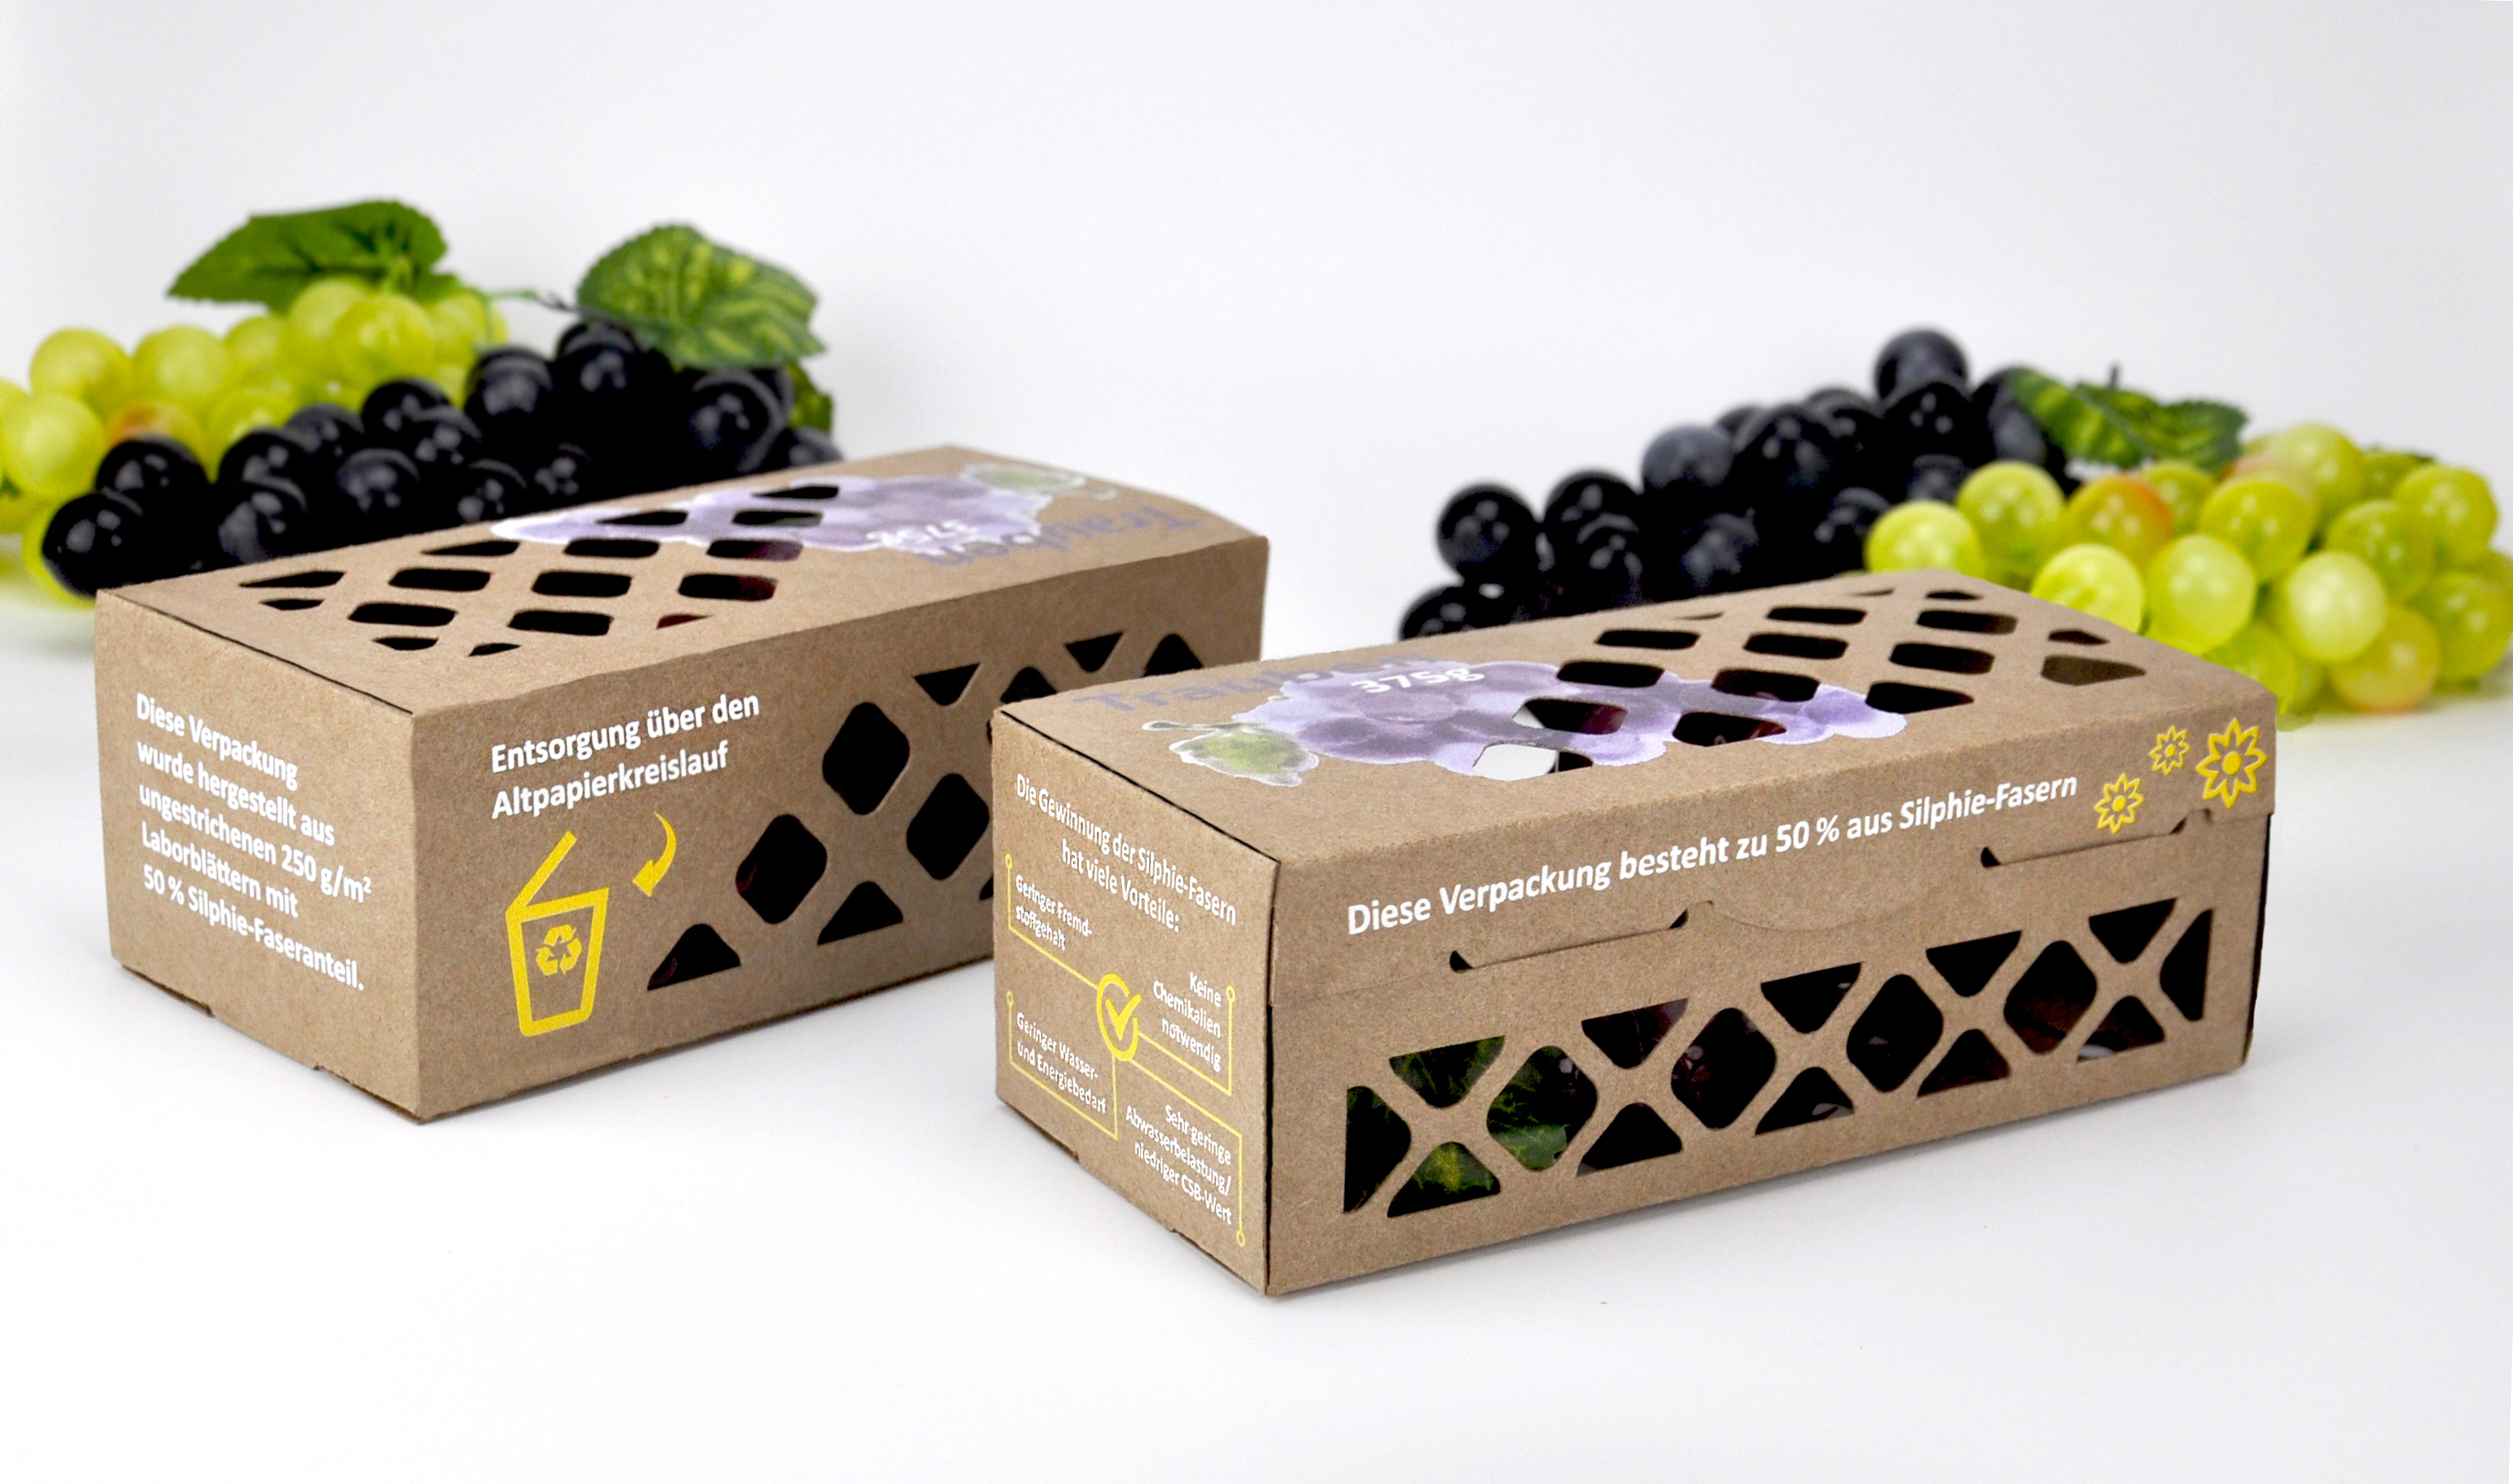 Brown fruit packaging made of paper produced from Silphium fibres